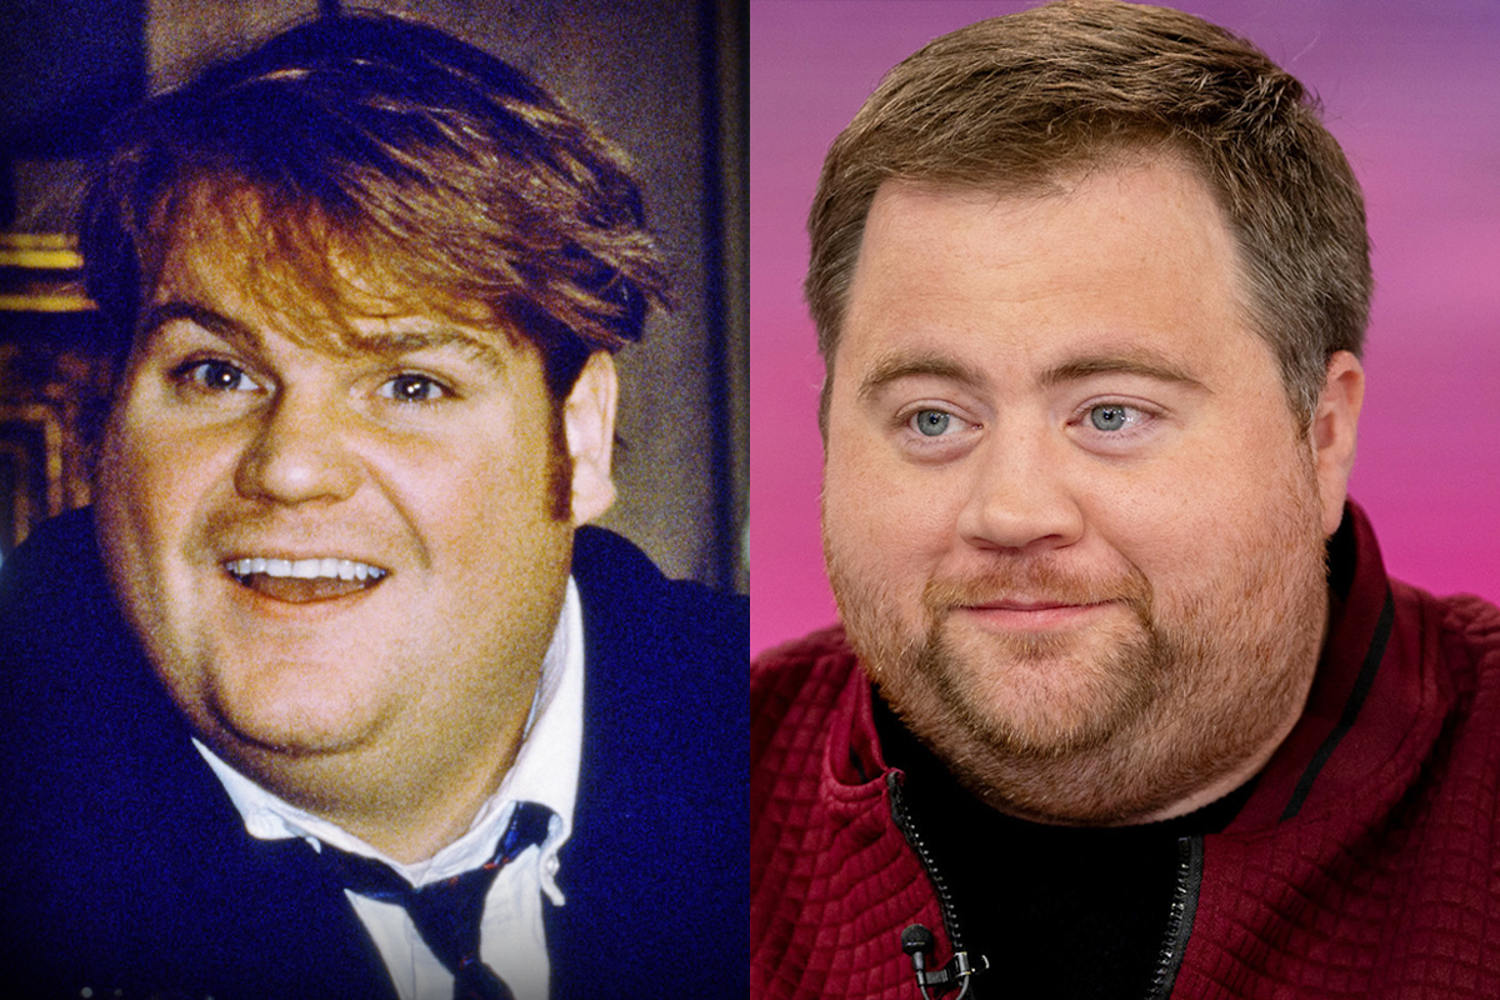 Chris Farley biopic starring Paul Walter Hauser and directed by Josh Gad is in the works